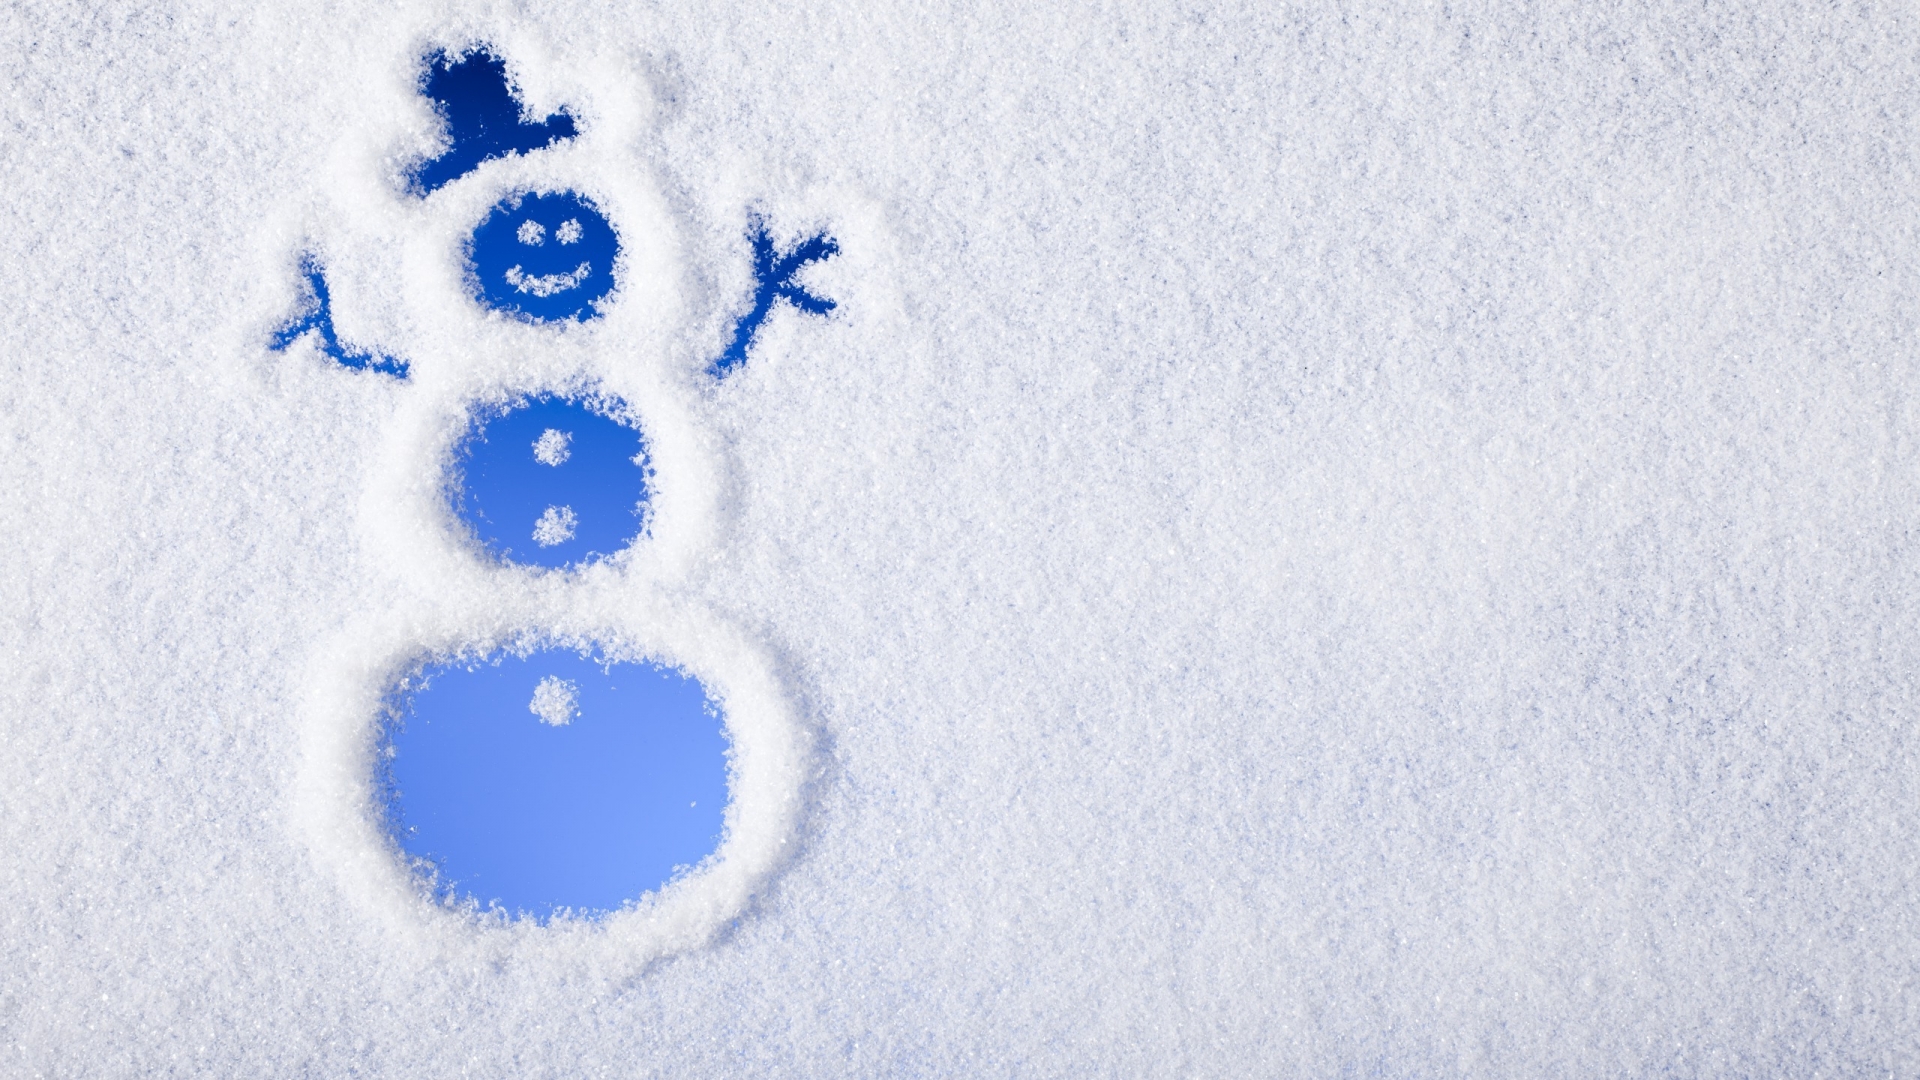 Happy and cute snowman   High Definition Wallpapers   HD wallpapers